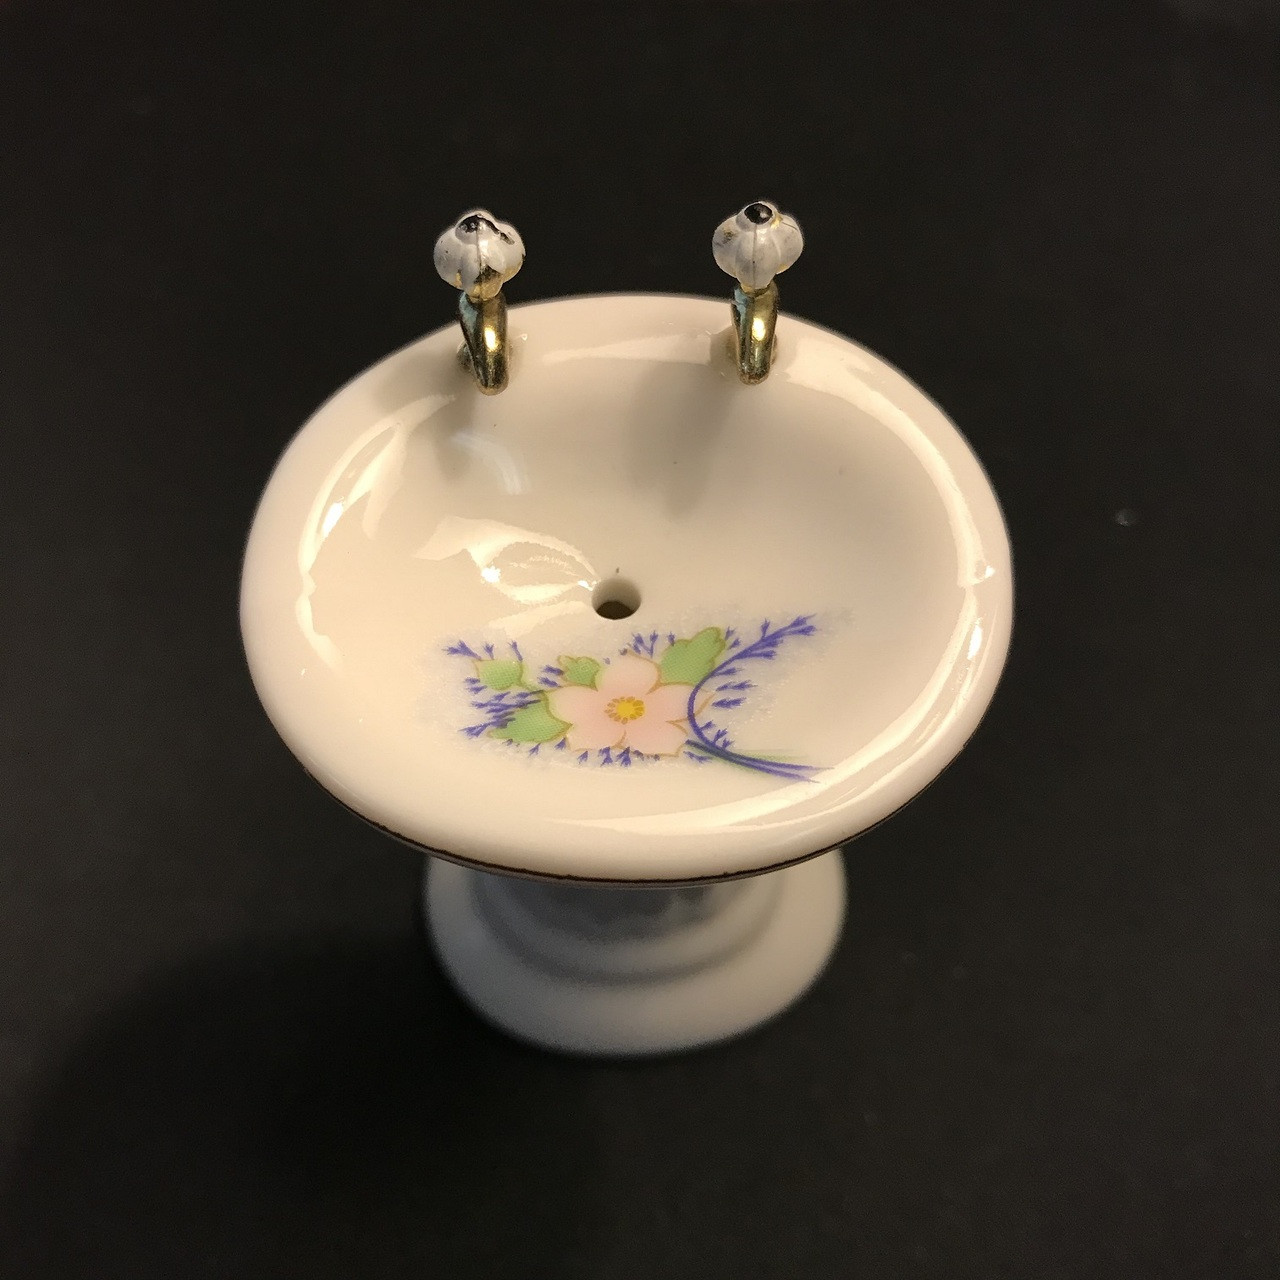 Top of dollhouse pedestal sink showing floral painted basin interior